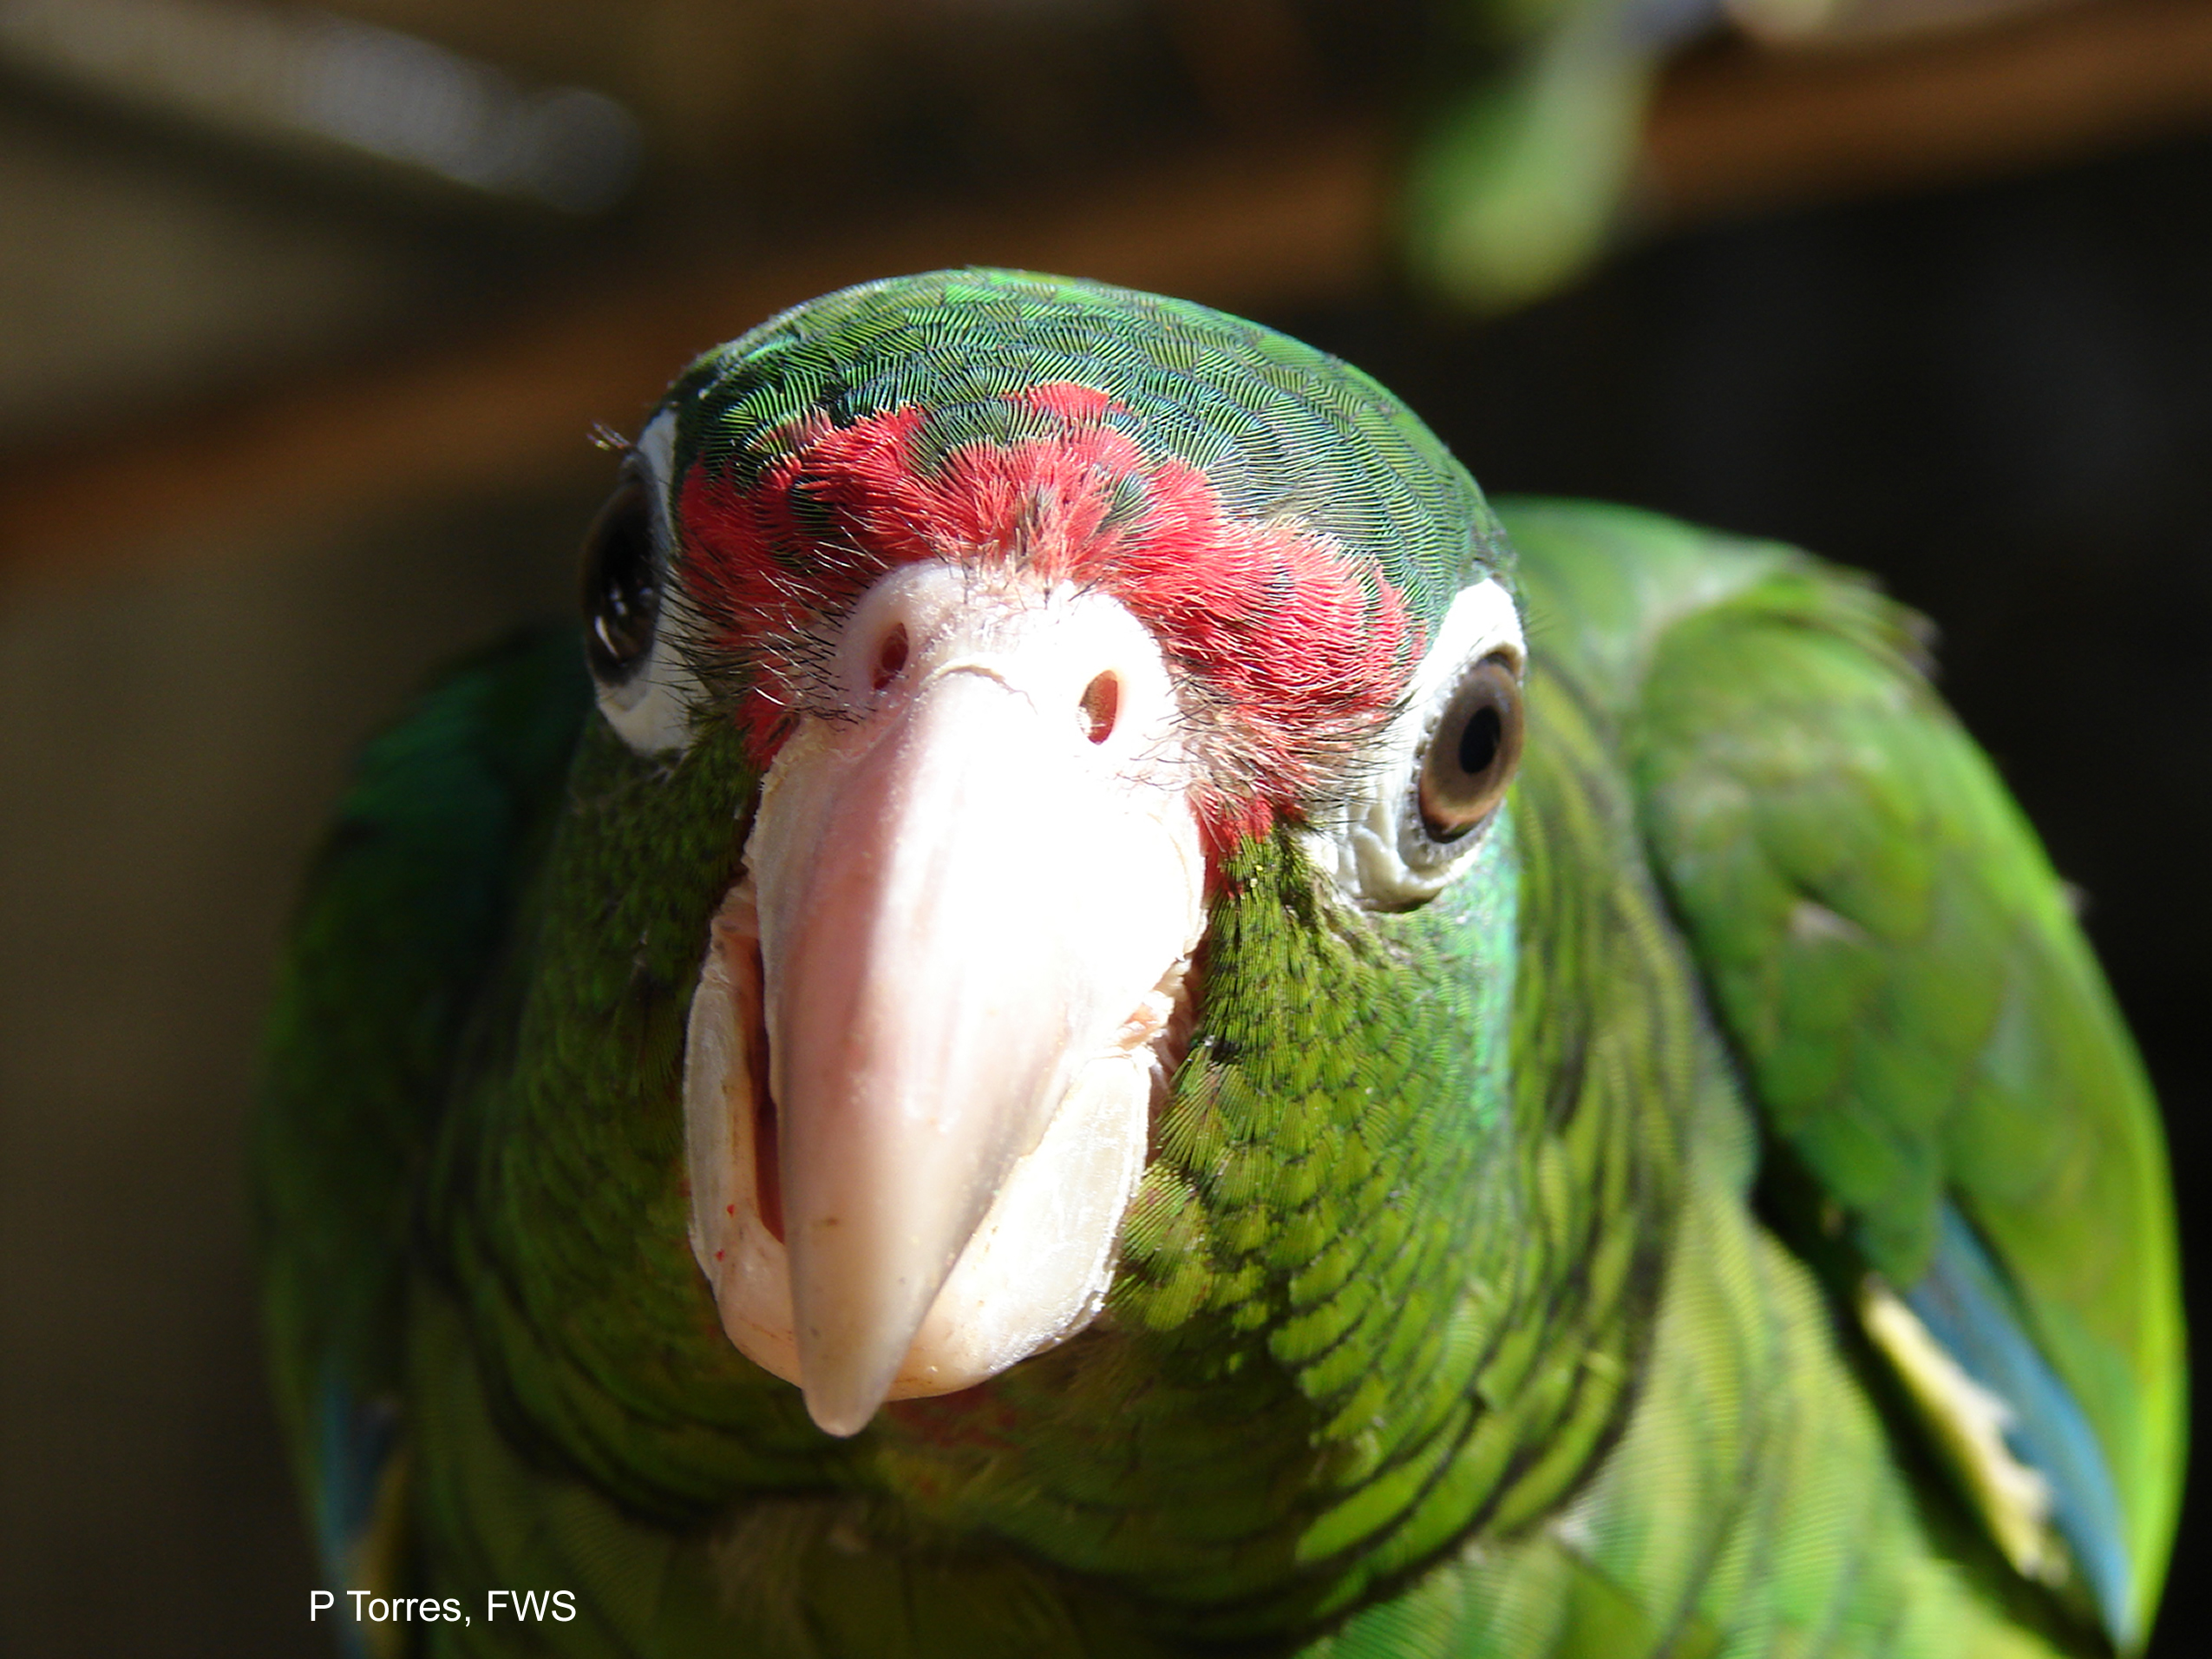 The Puerto Rican Parrot | You, Me, & Biodiversity